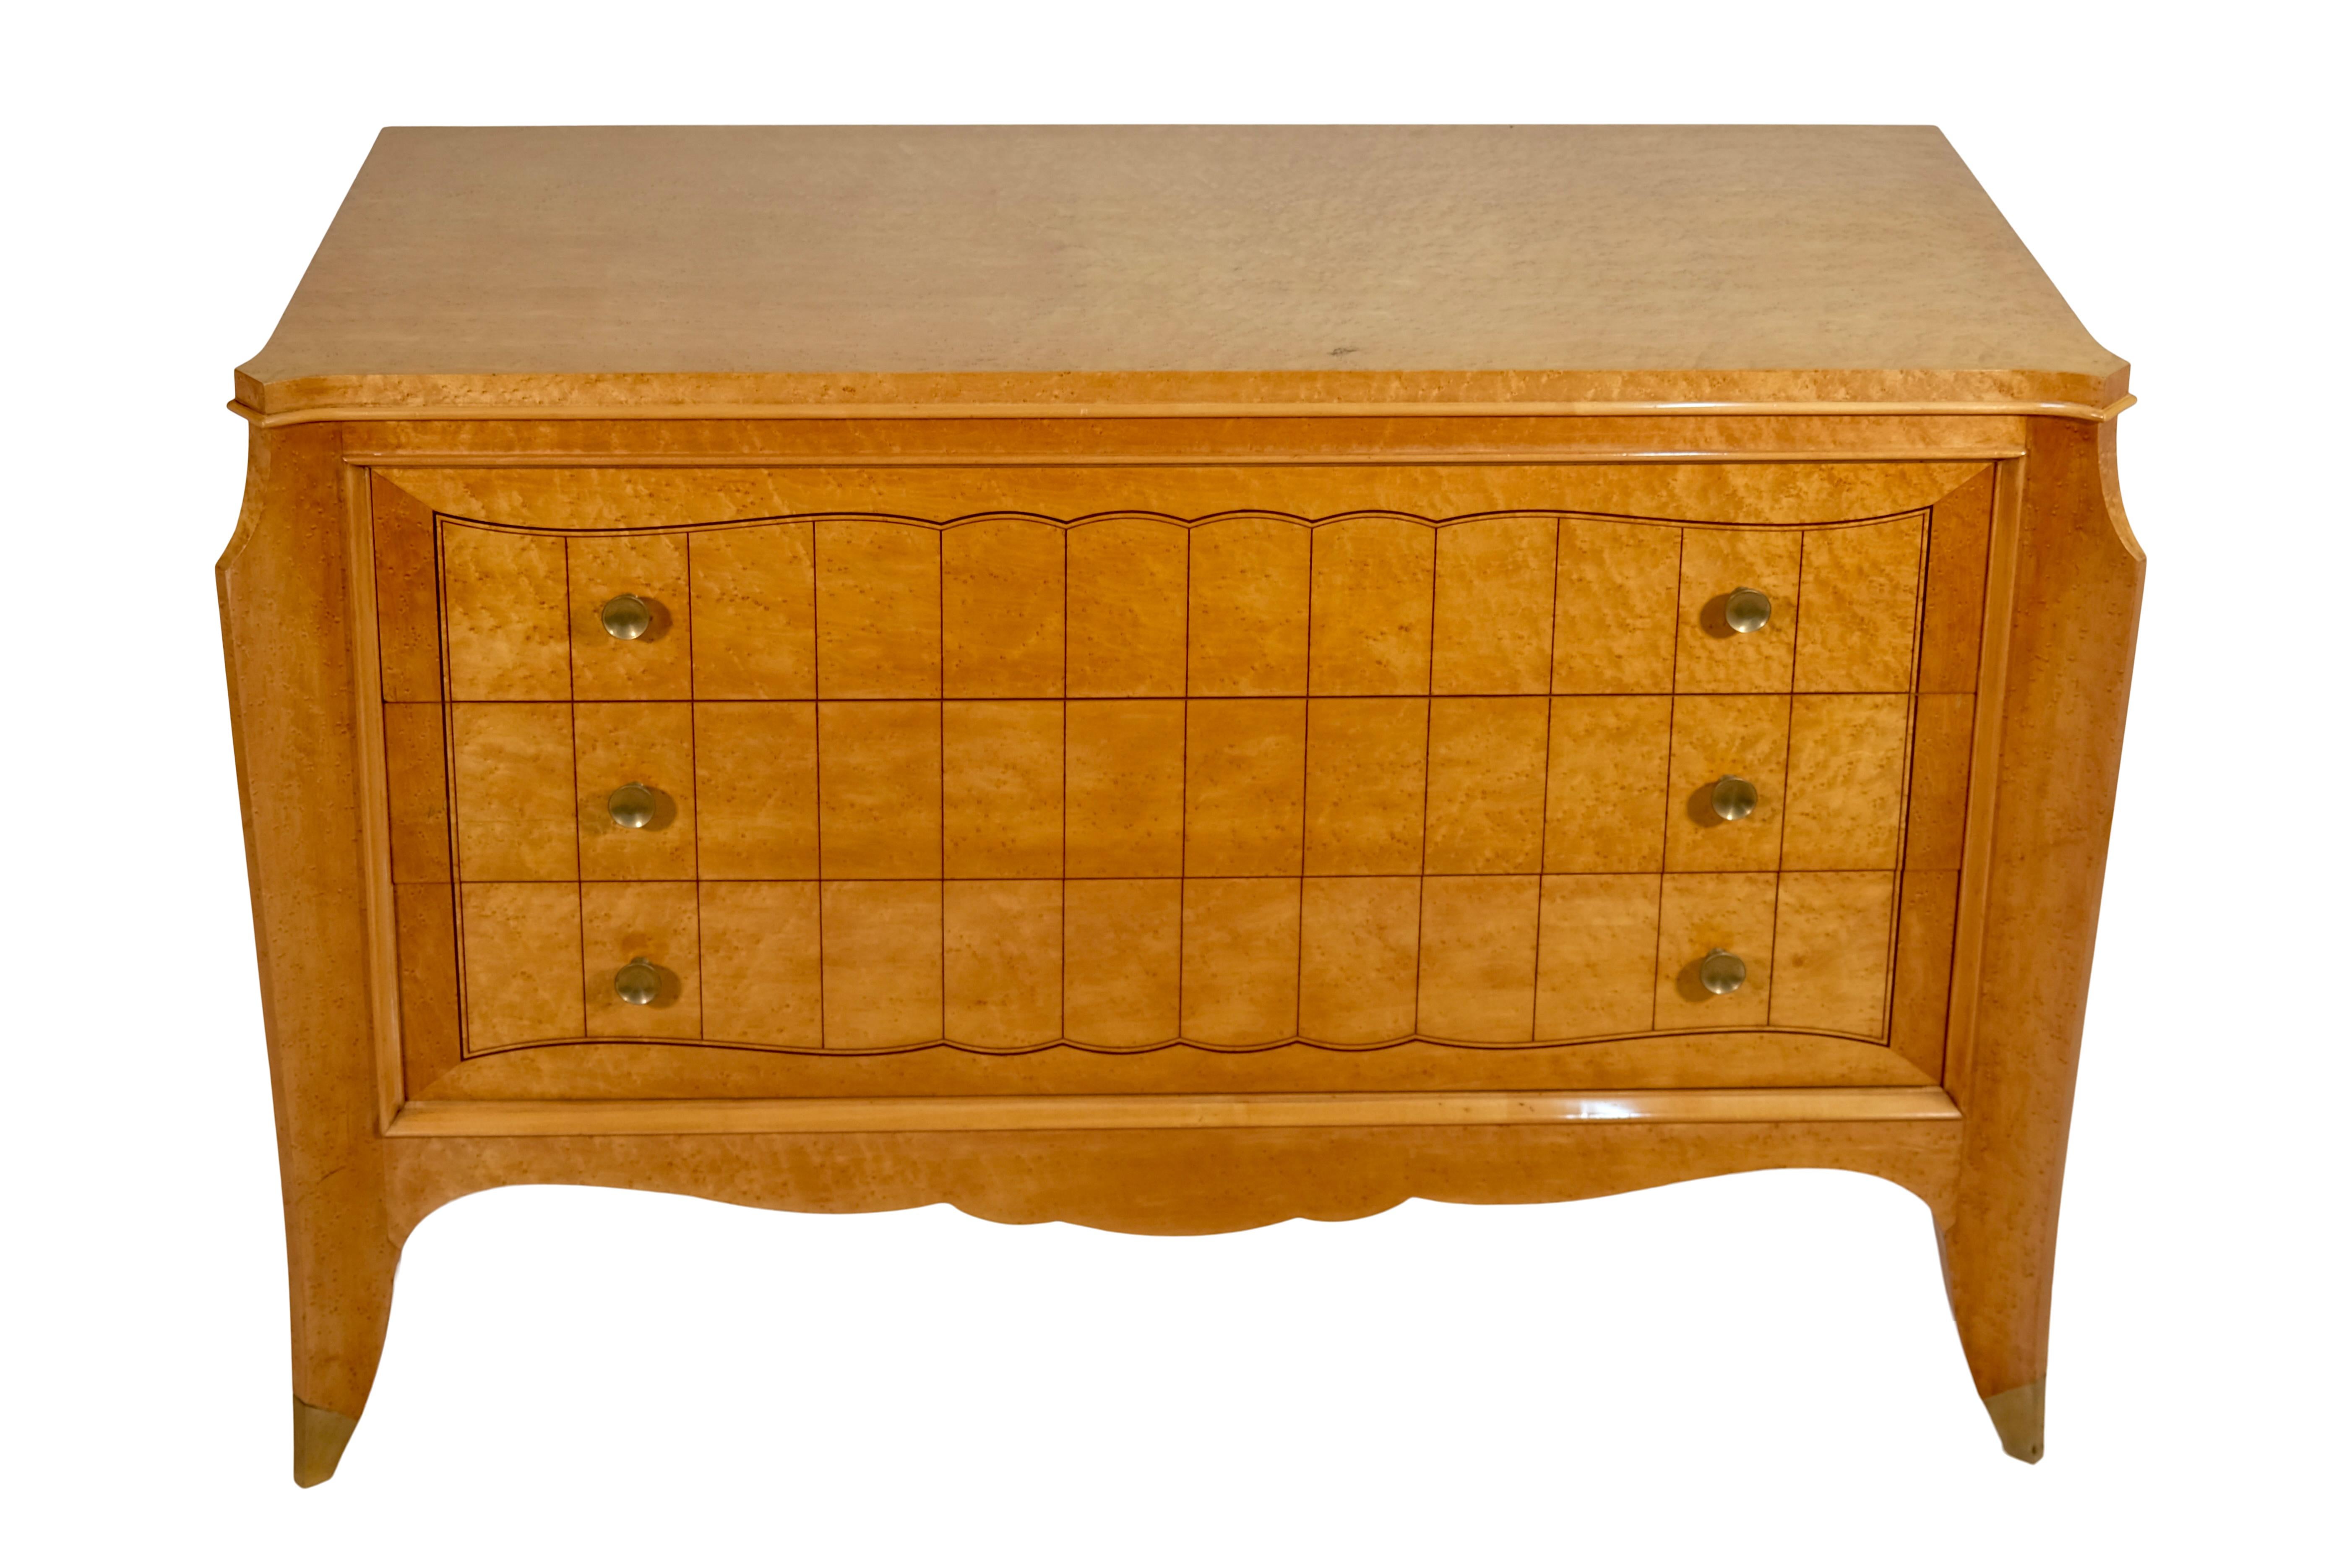 Discover the fascinating Jean Pascaud chest of drawers in bird's eye maple, an outstanding example of the unmistakable formal language and iconic design of this renowned artist. With its clean lines, geometric ornaments, and elegant proportions,